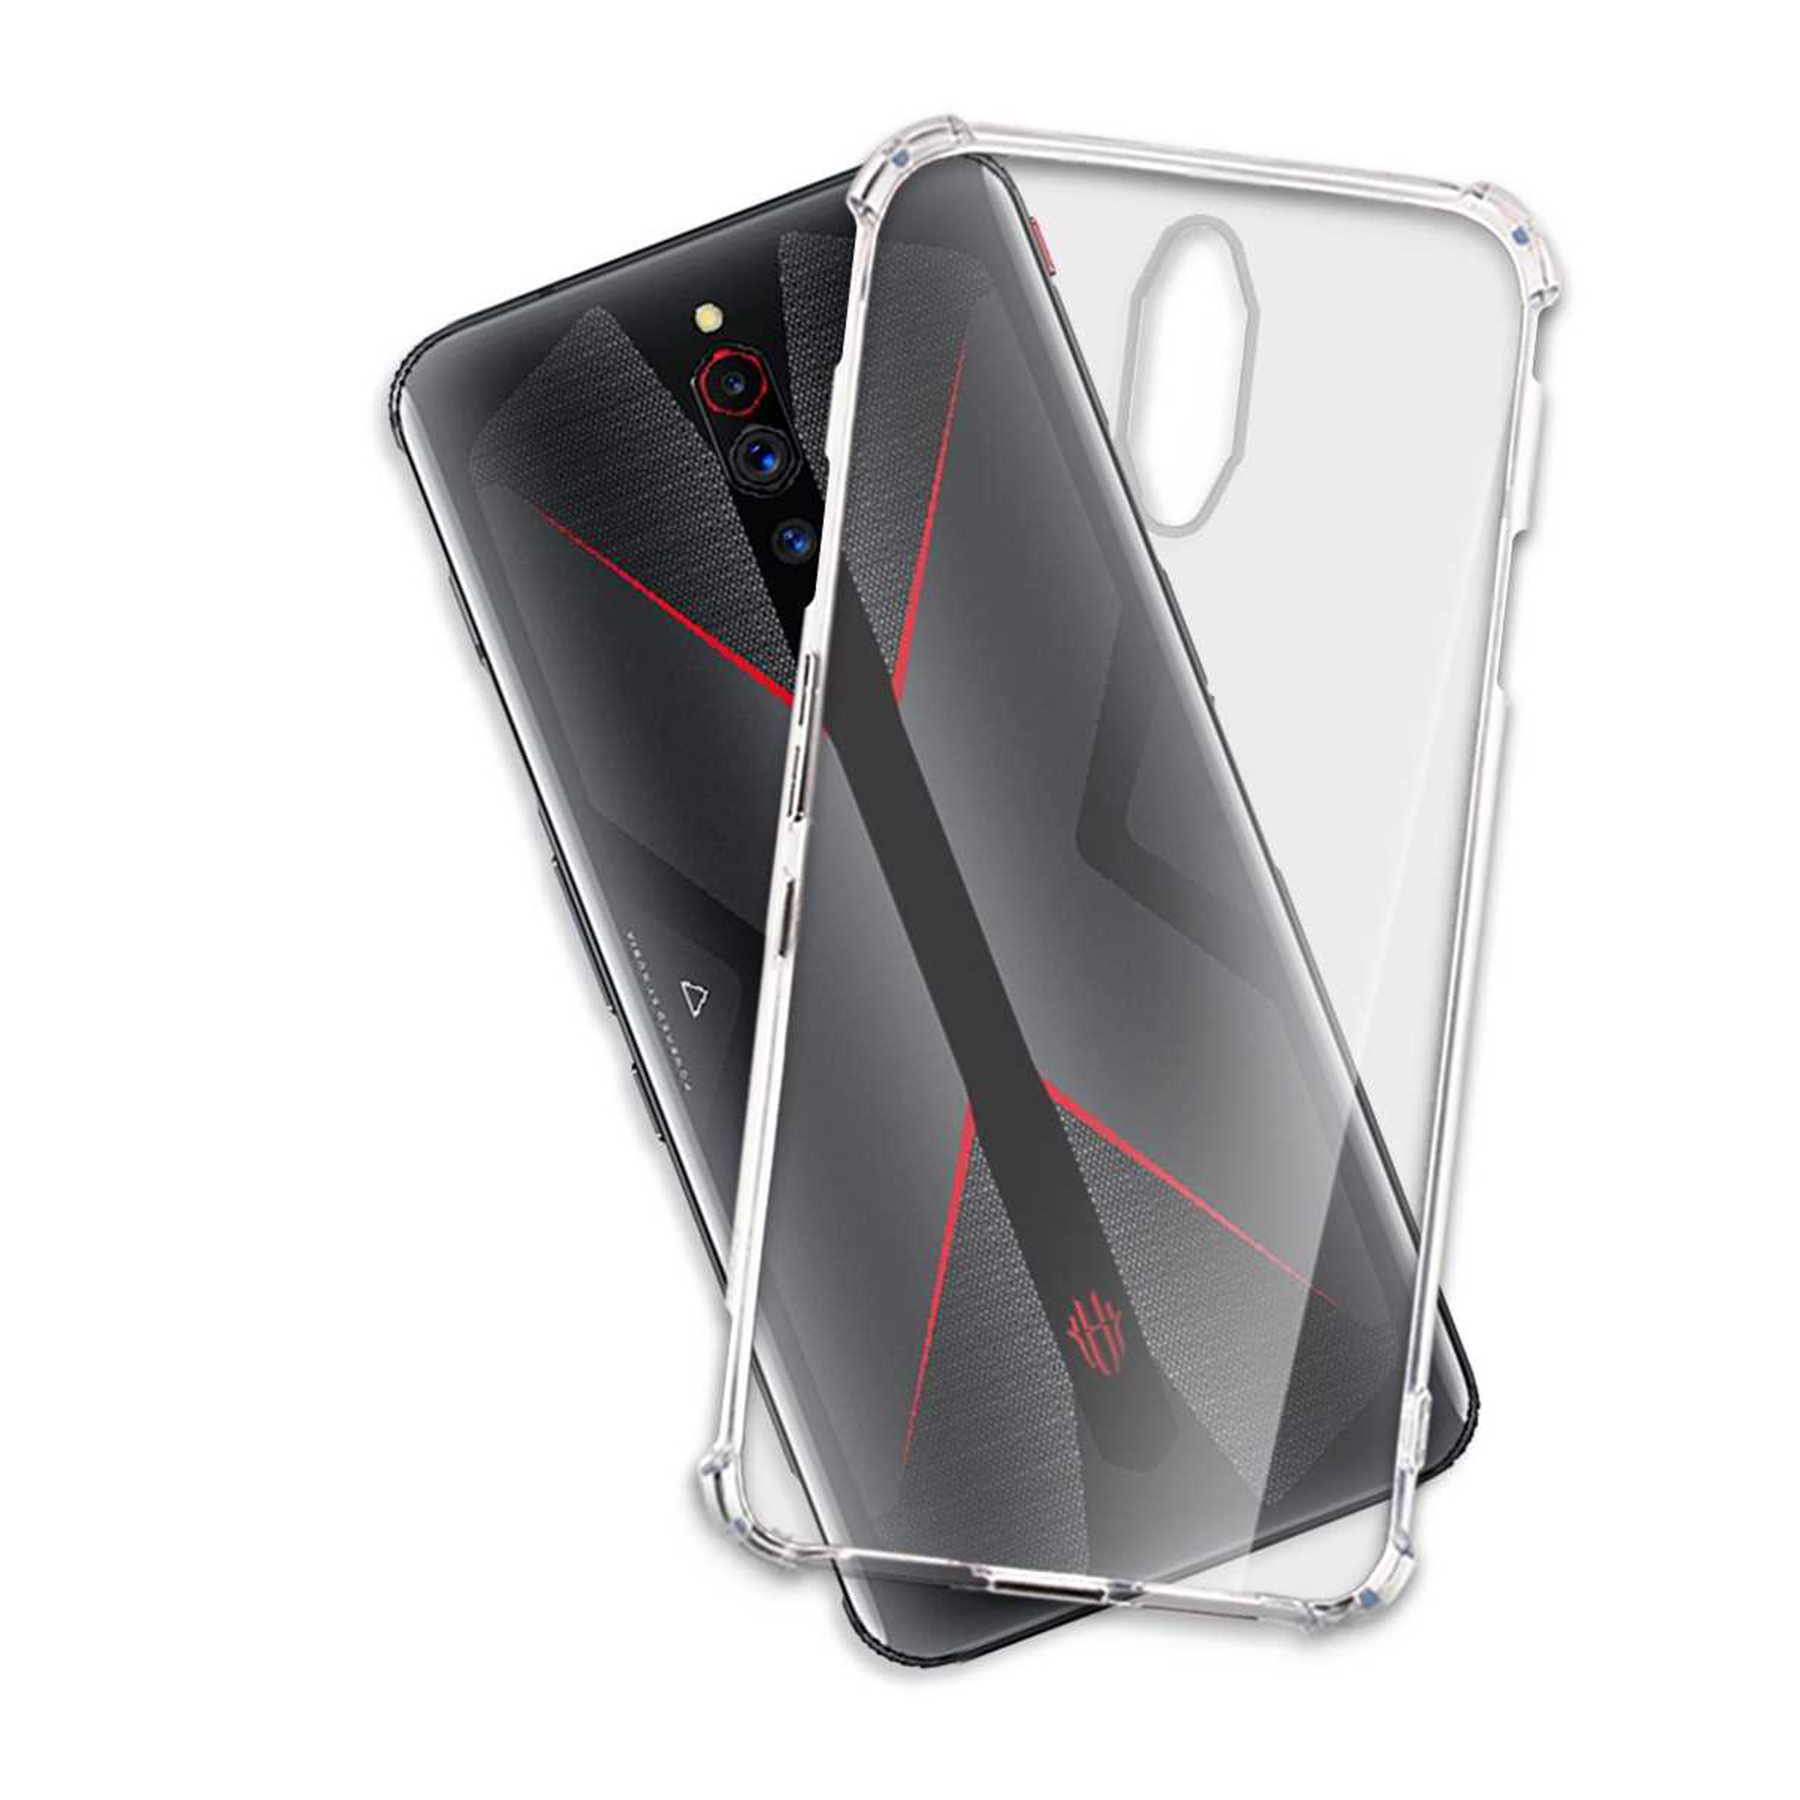 MTB MORE ENERGY 5G, Magic Case, Nubia Red Clear Armor Transparent ZTE, Backcover